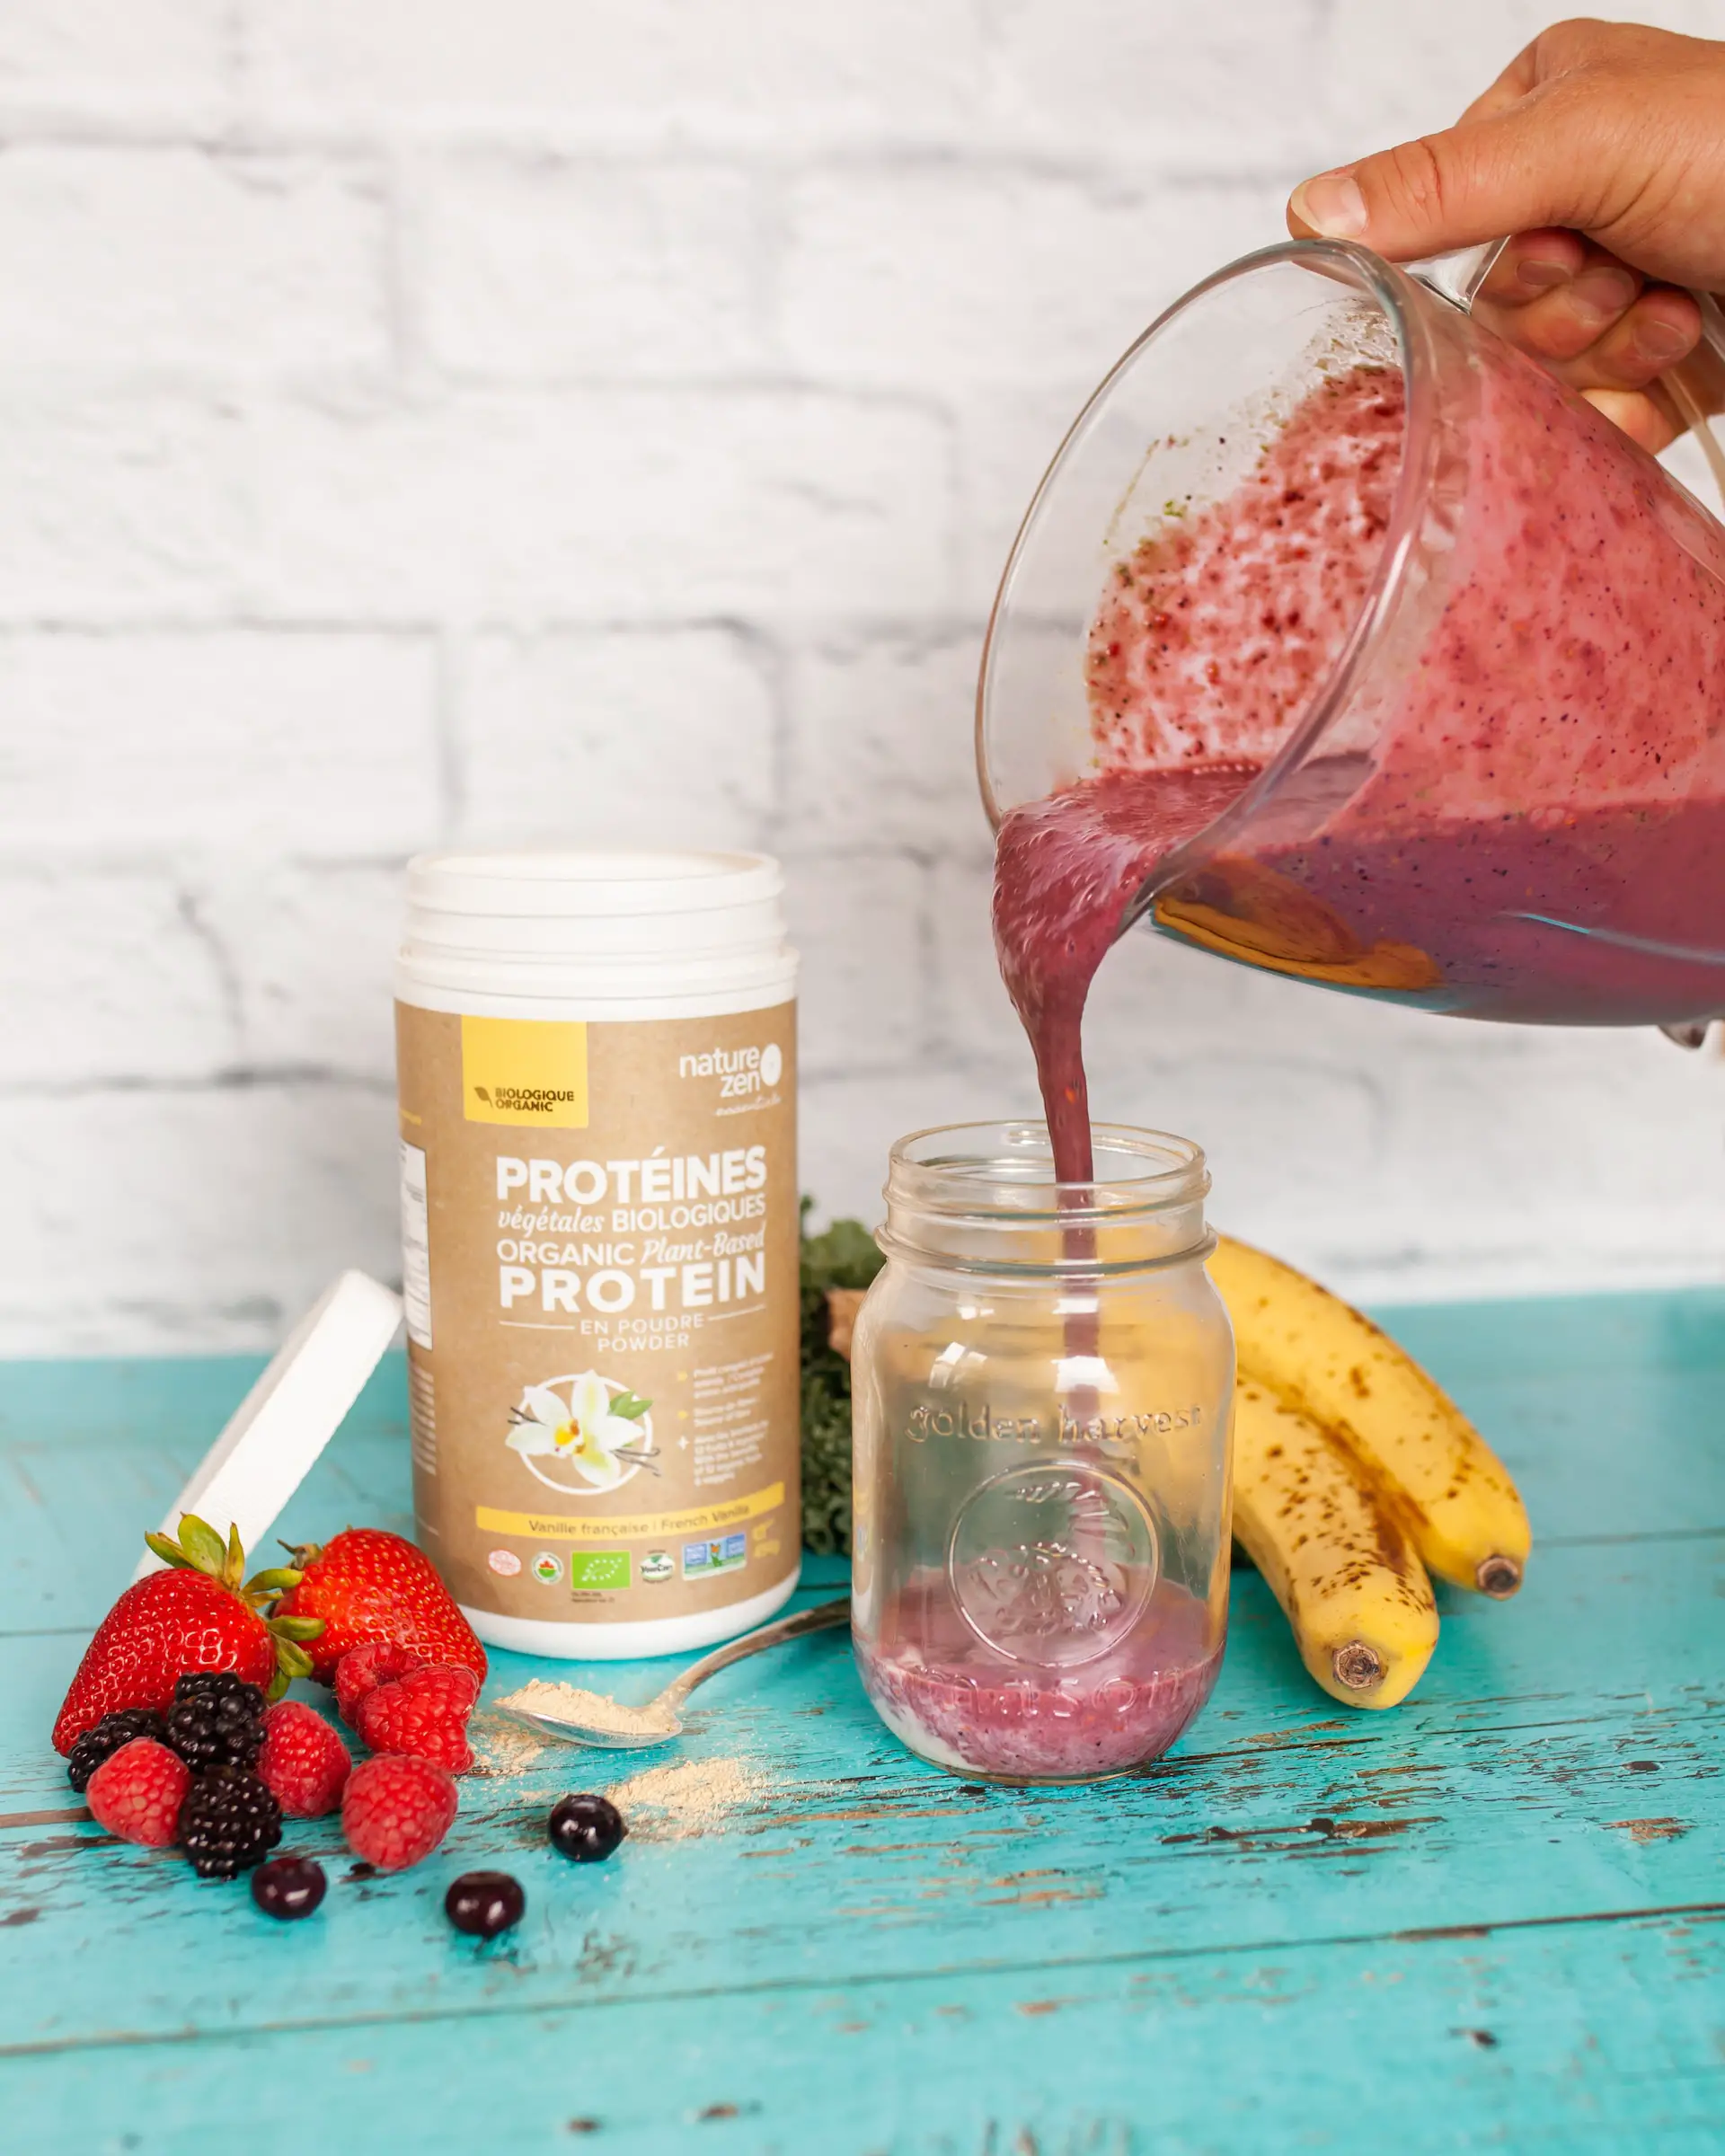 Mixing up protein powder in a shake to bulk up